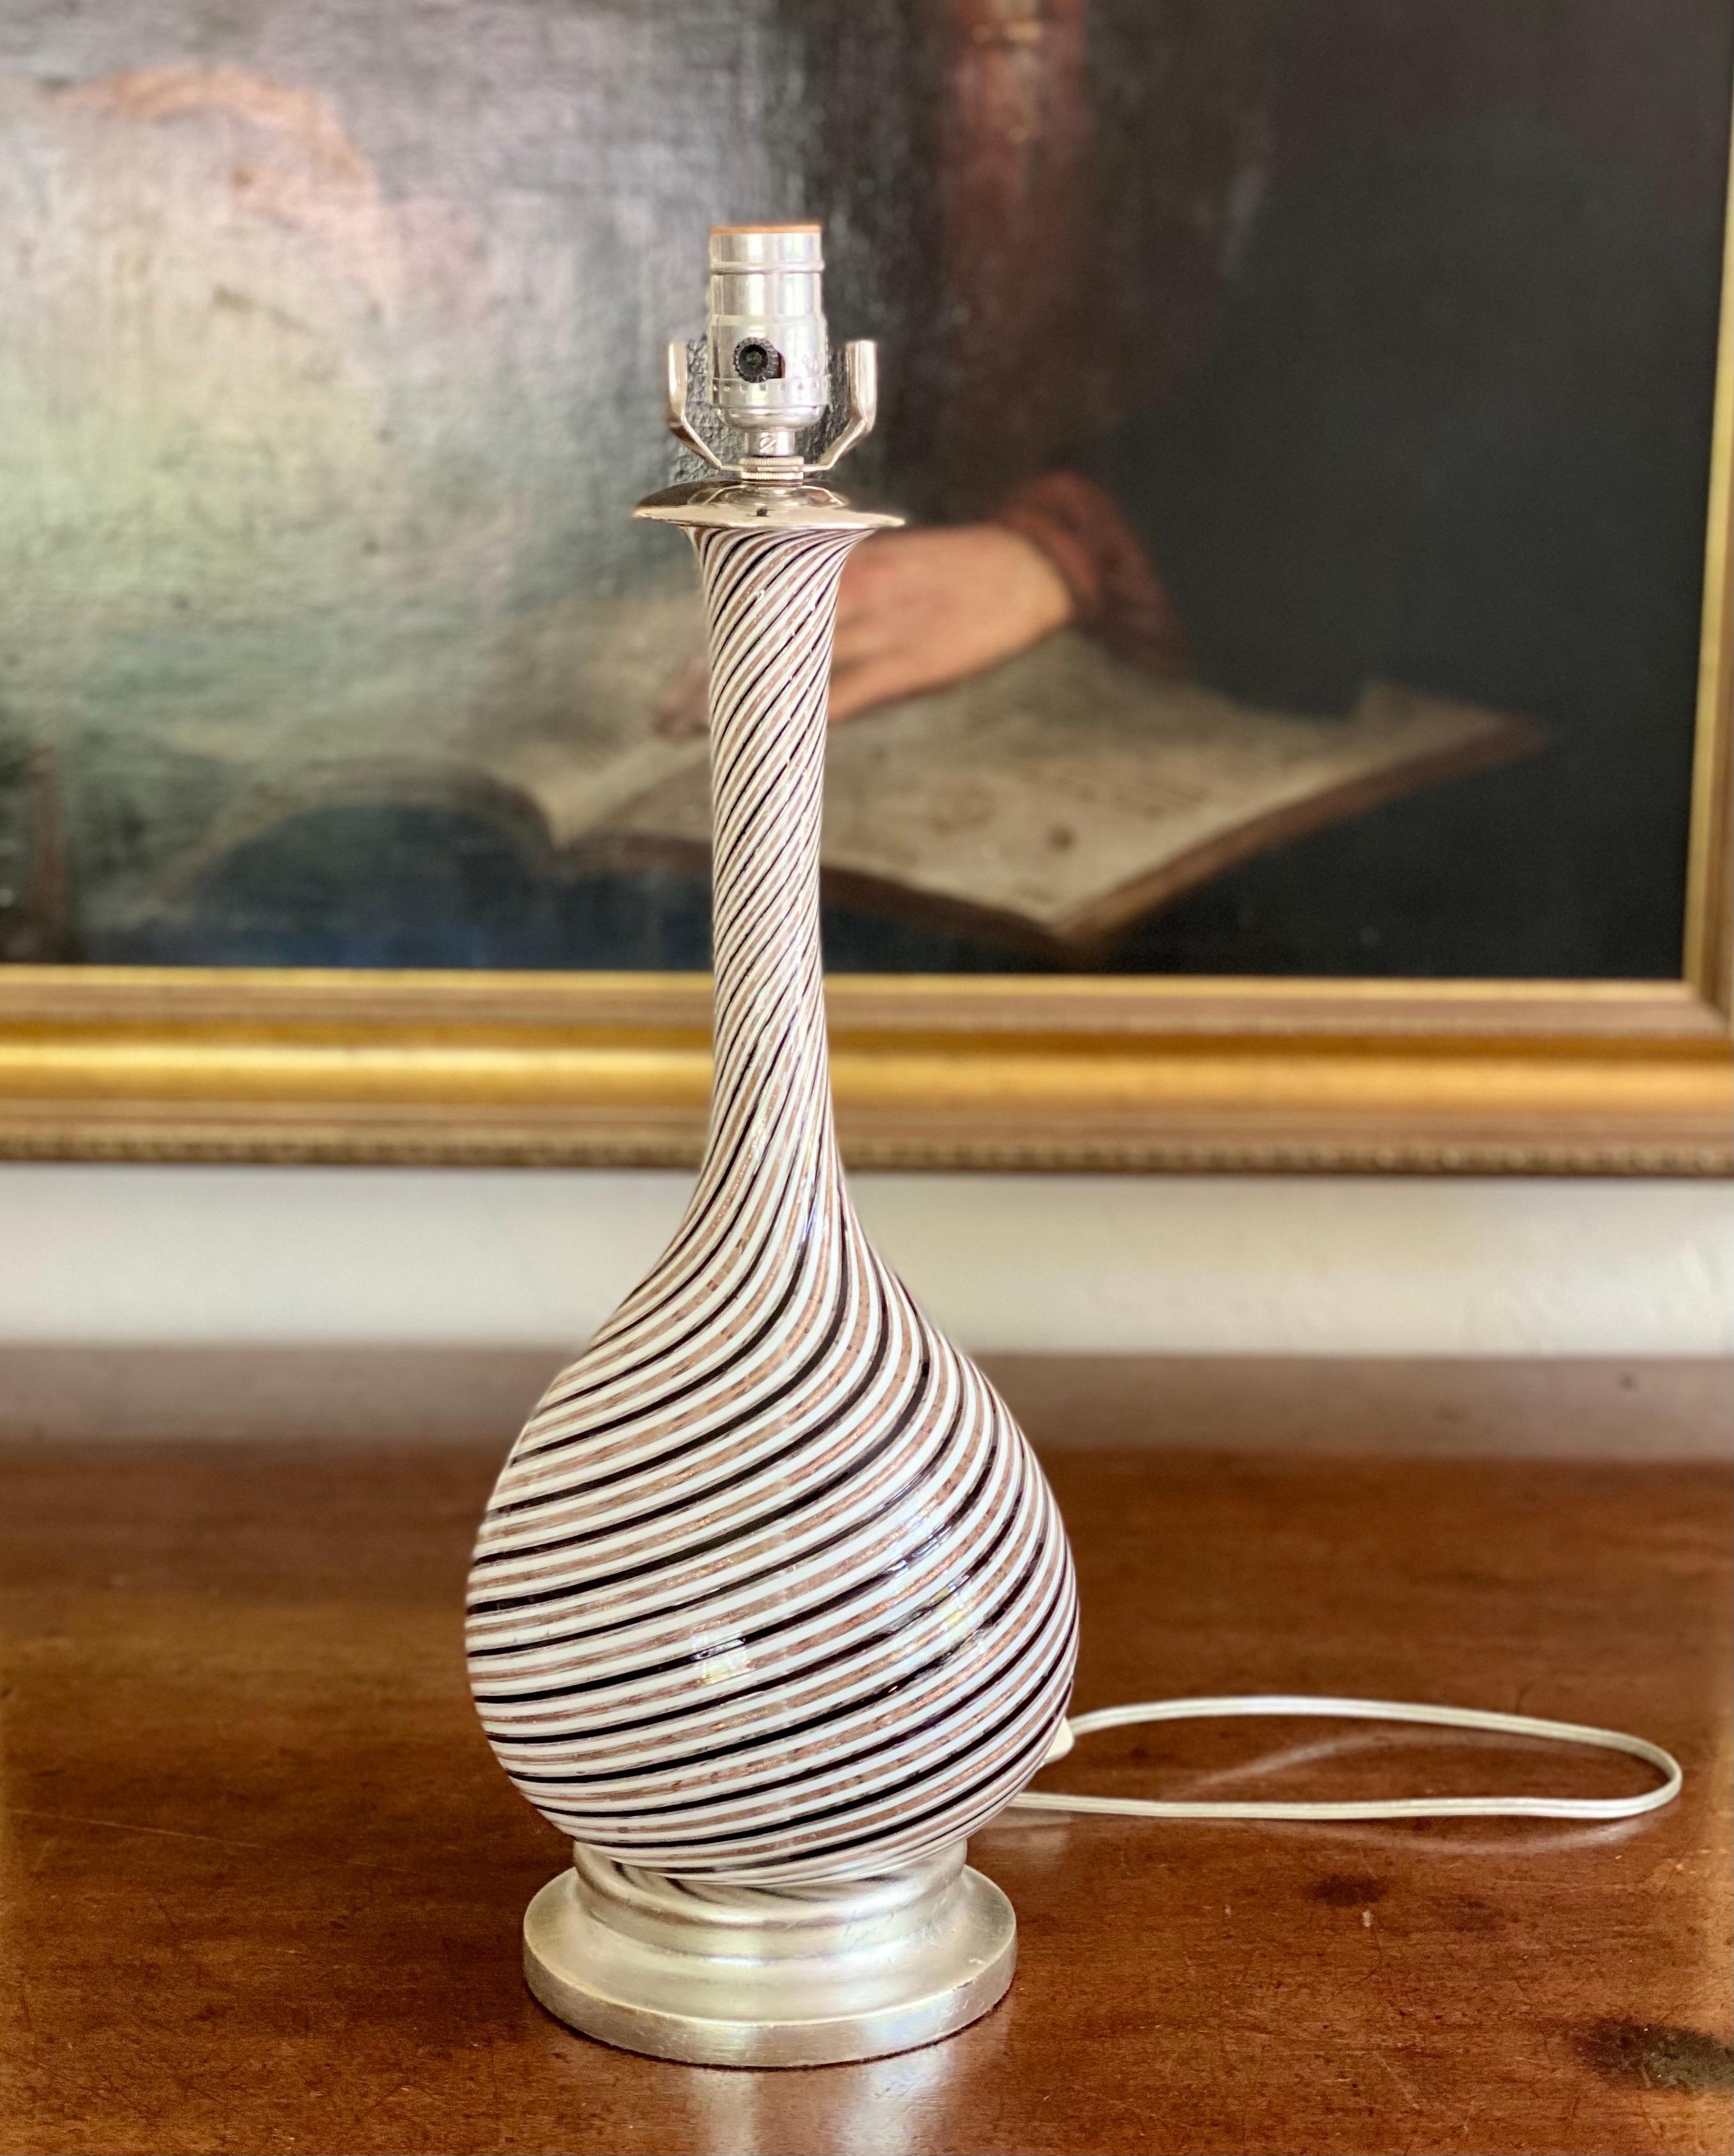 A very fine, beautifully shaped Murano glass lamp, with clear glass and swirls in soft black tones
and alternating gold with gilded flecks. The base has been gilded in white gold. 
Harp, bulb, shade and finial not included.